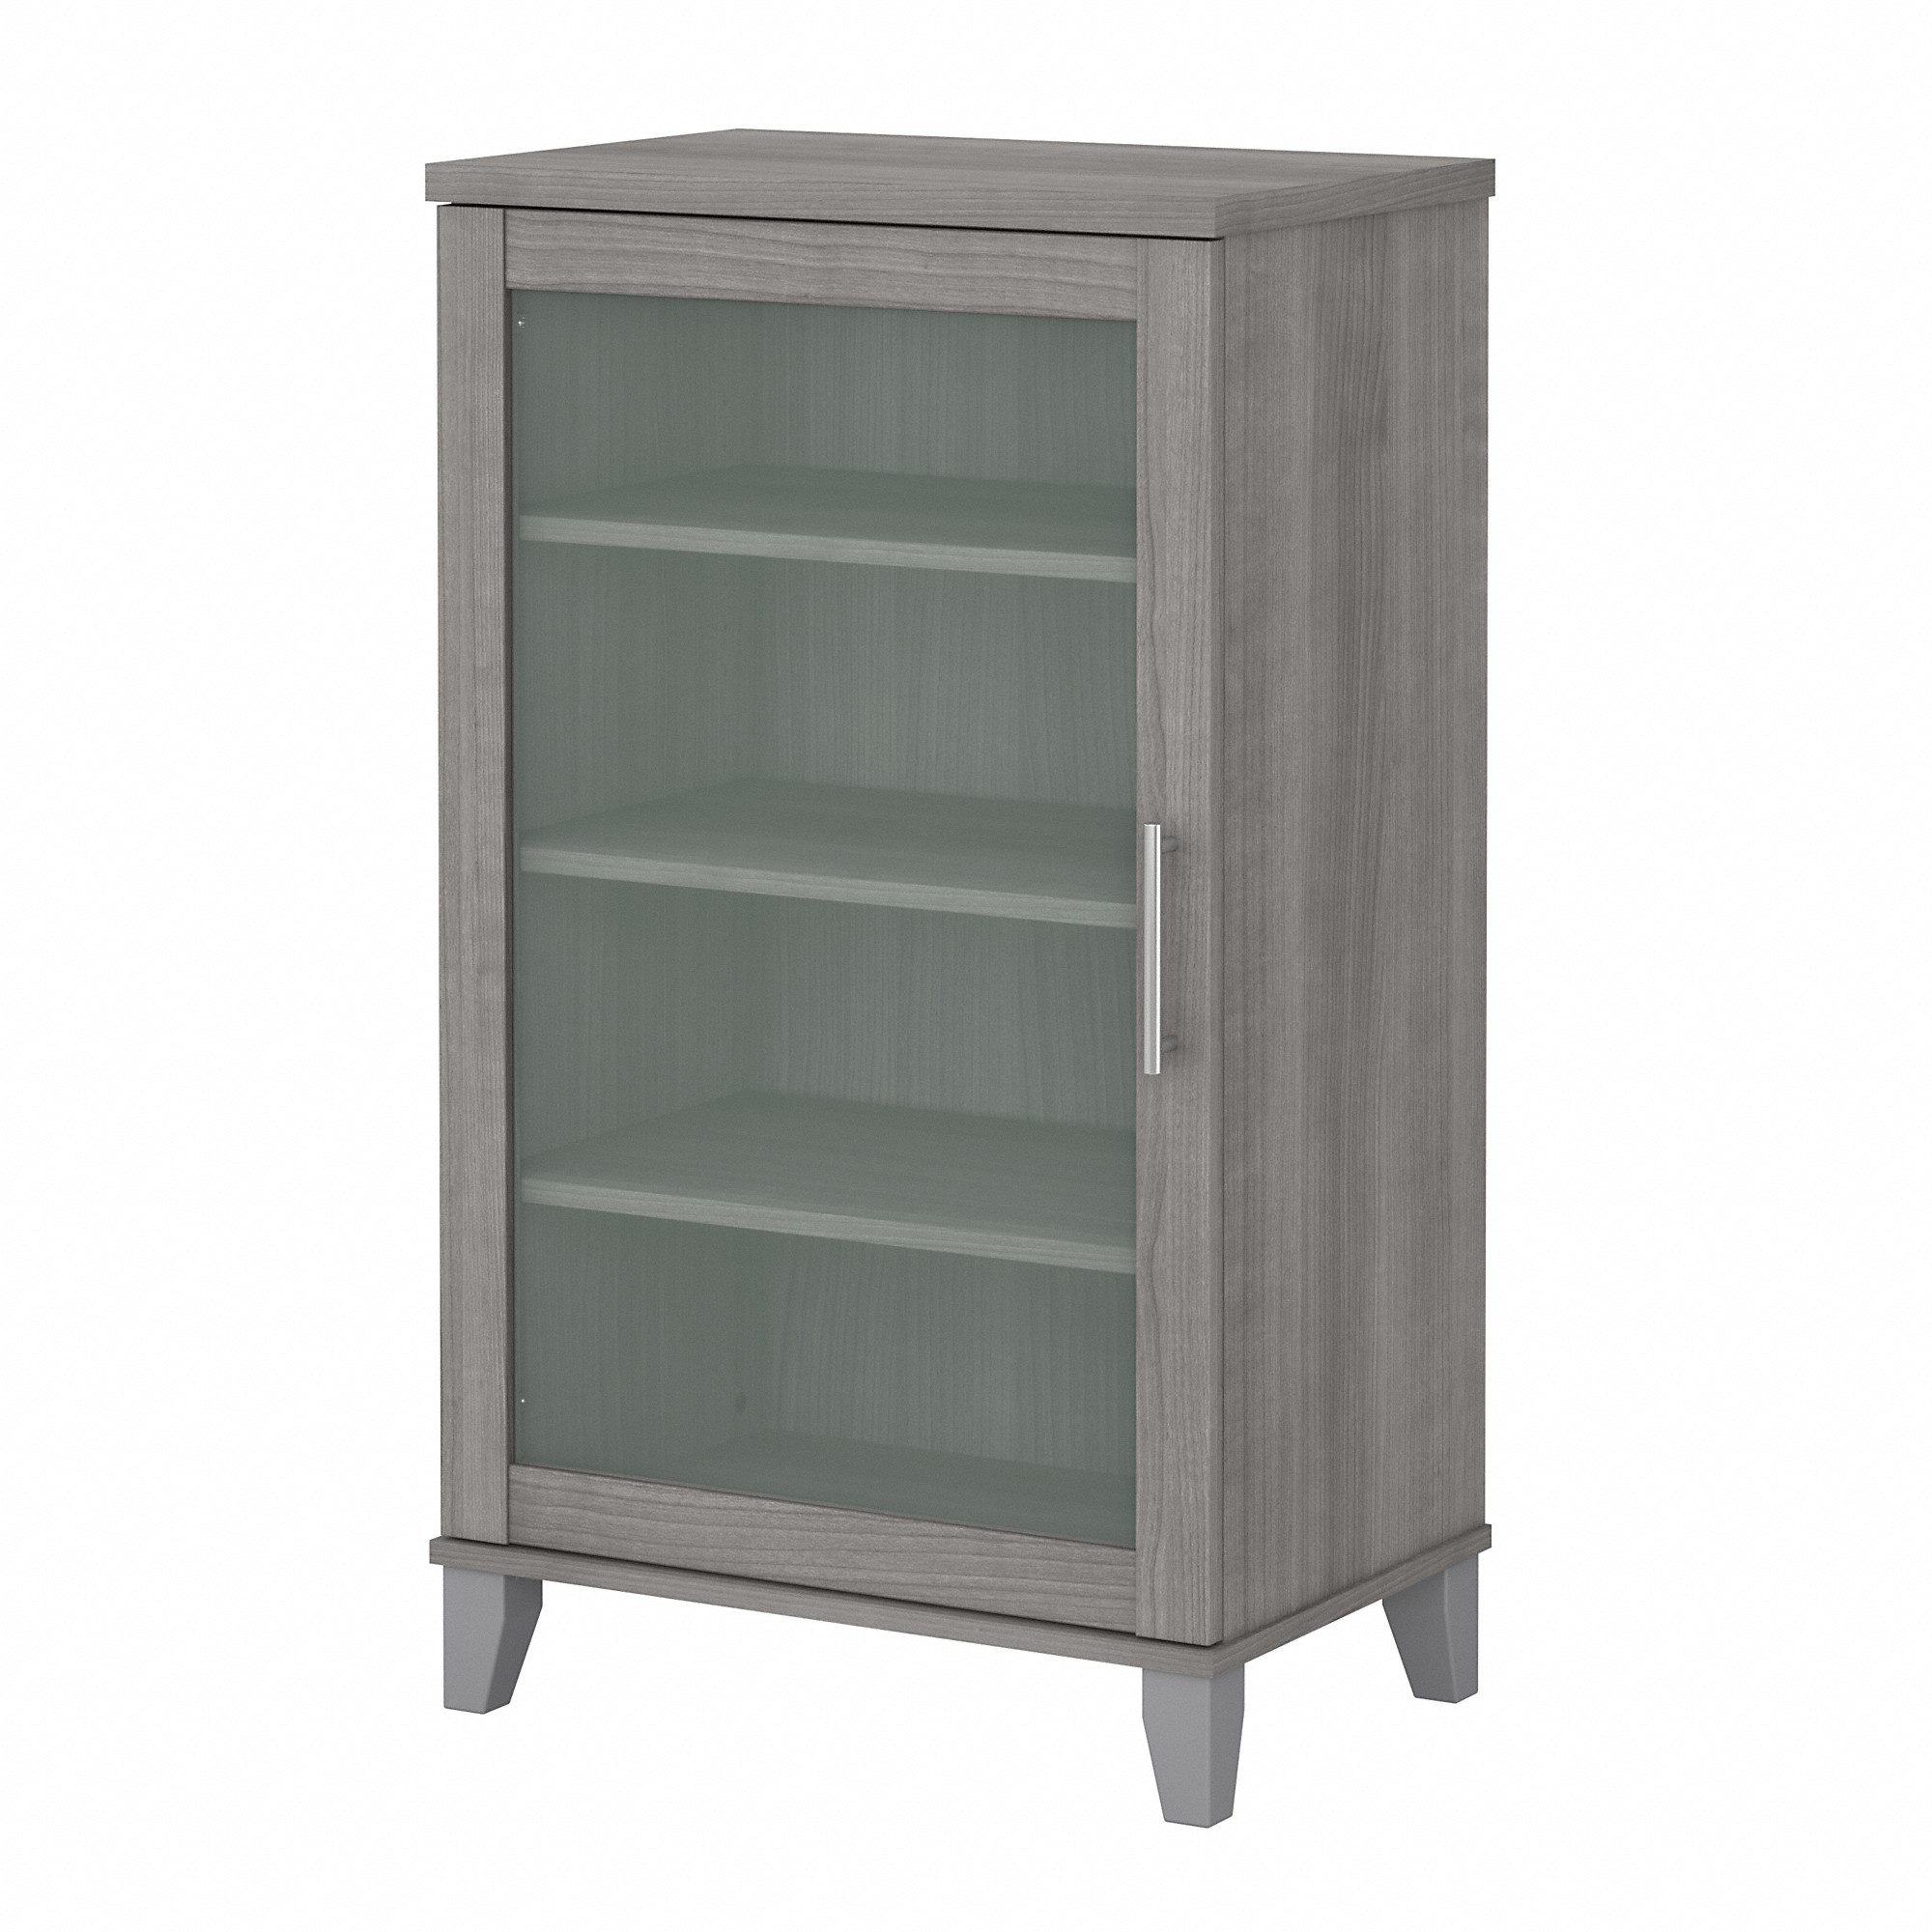 Bush Furniture Somerset Media Accent Cabinet with Door in Platinum Gray - image 1 of 8